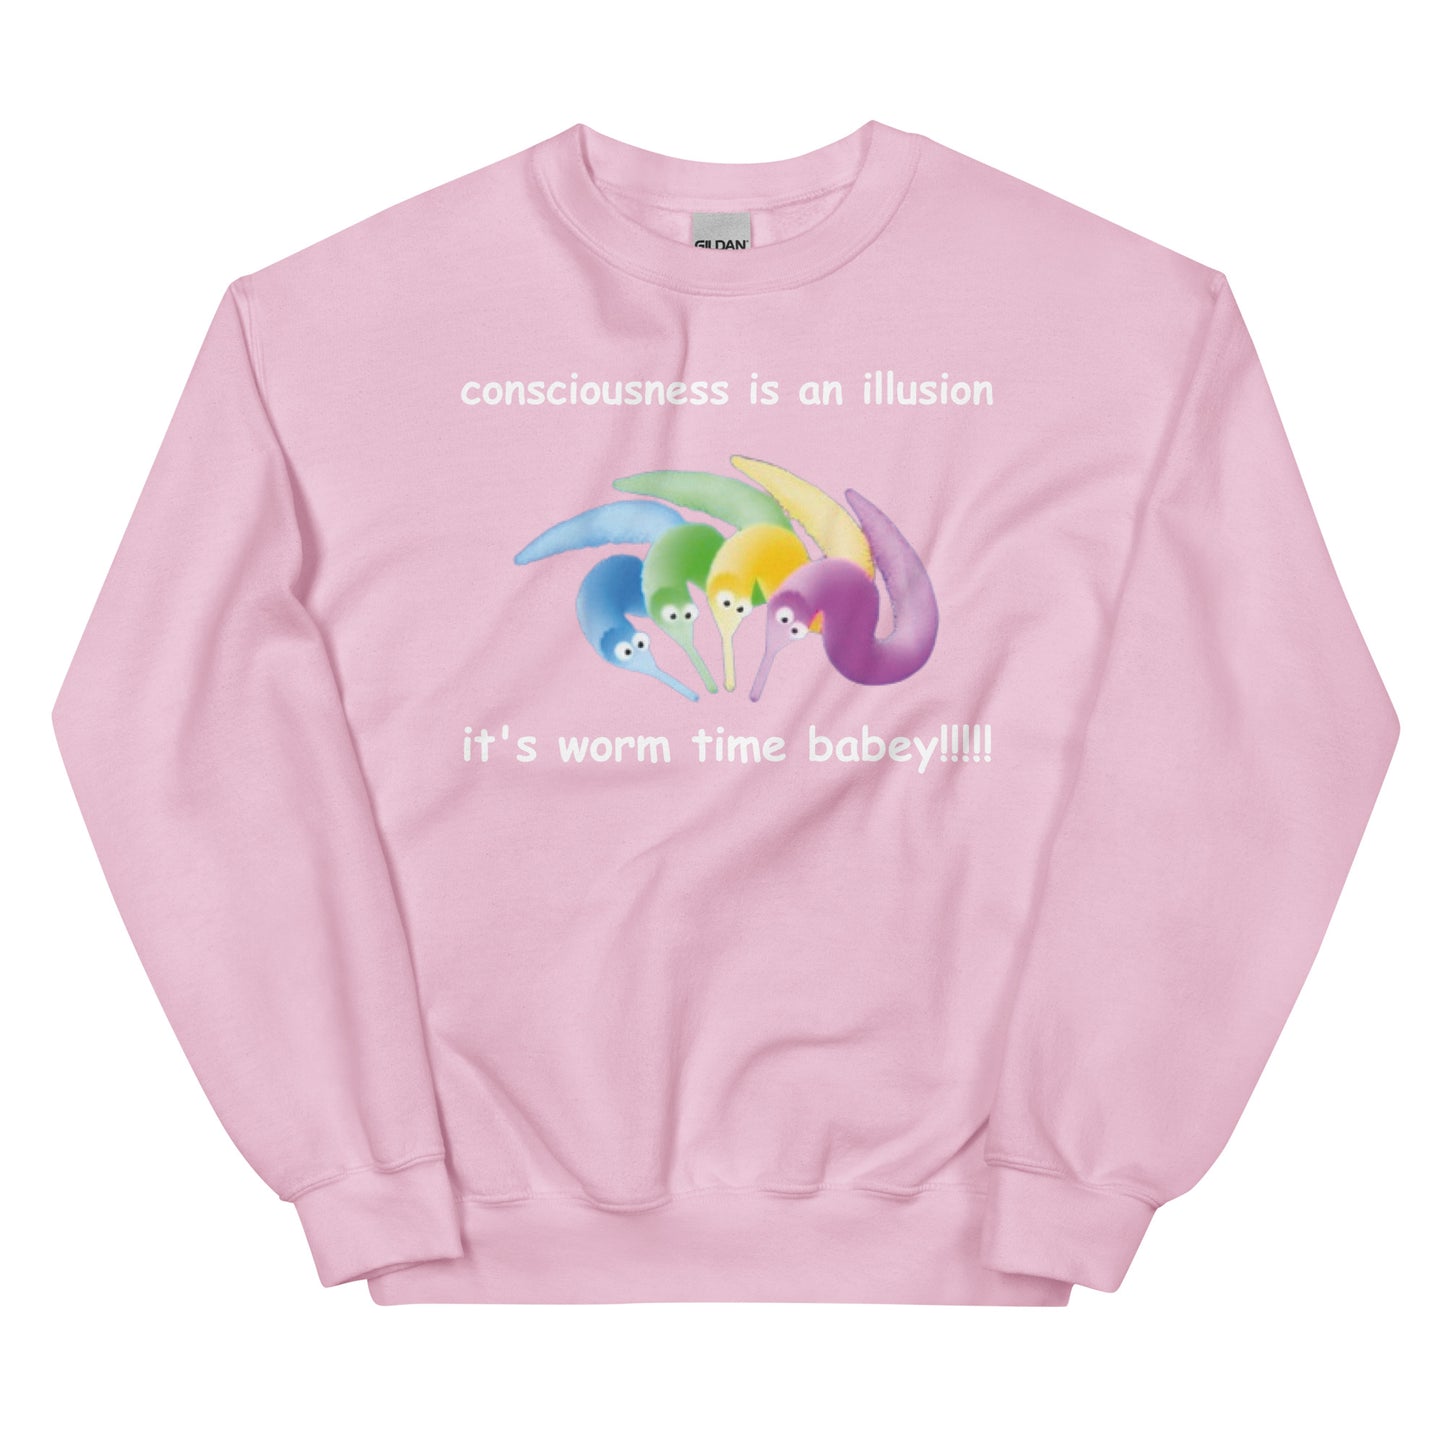 consciousness is an illusion it's worm time babey!!!!! Unisex Sweatshirt